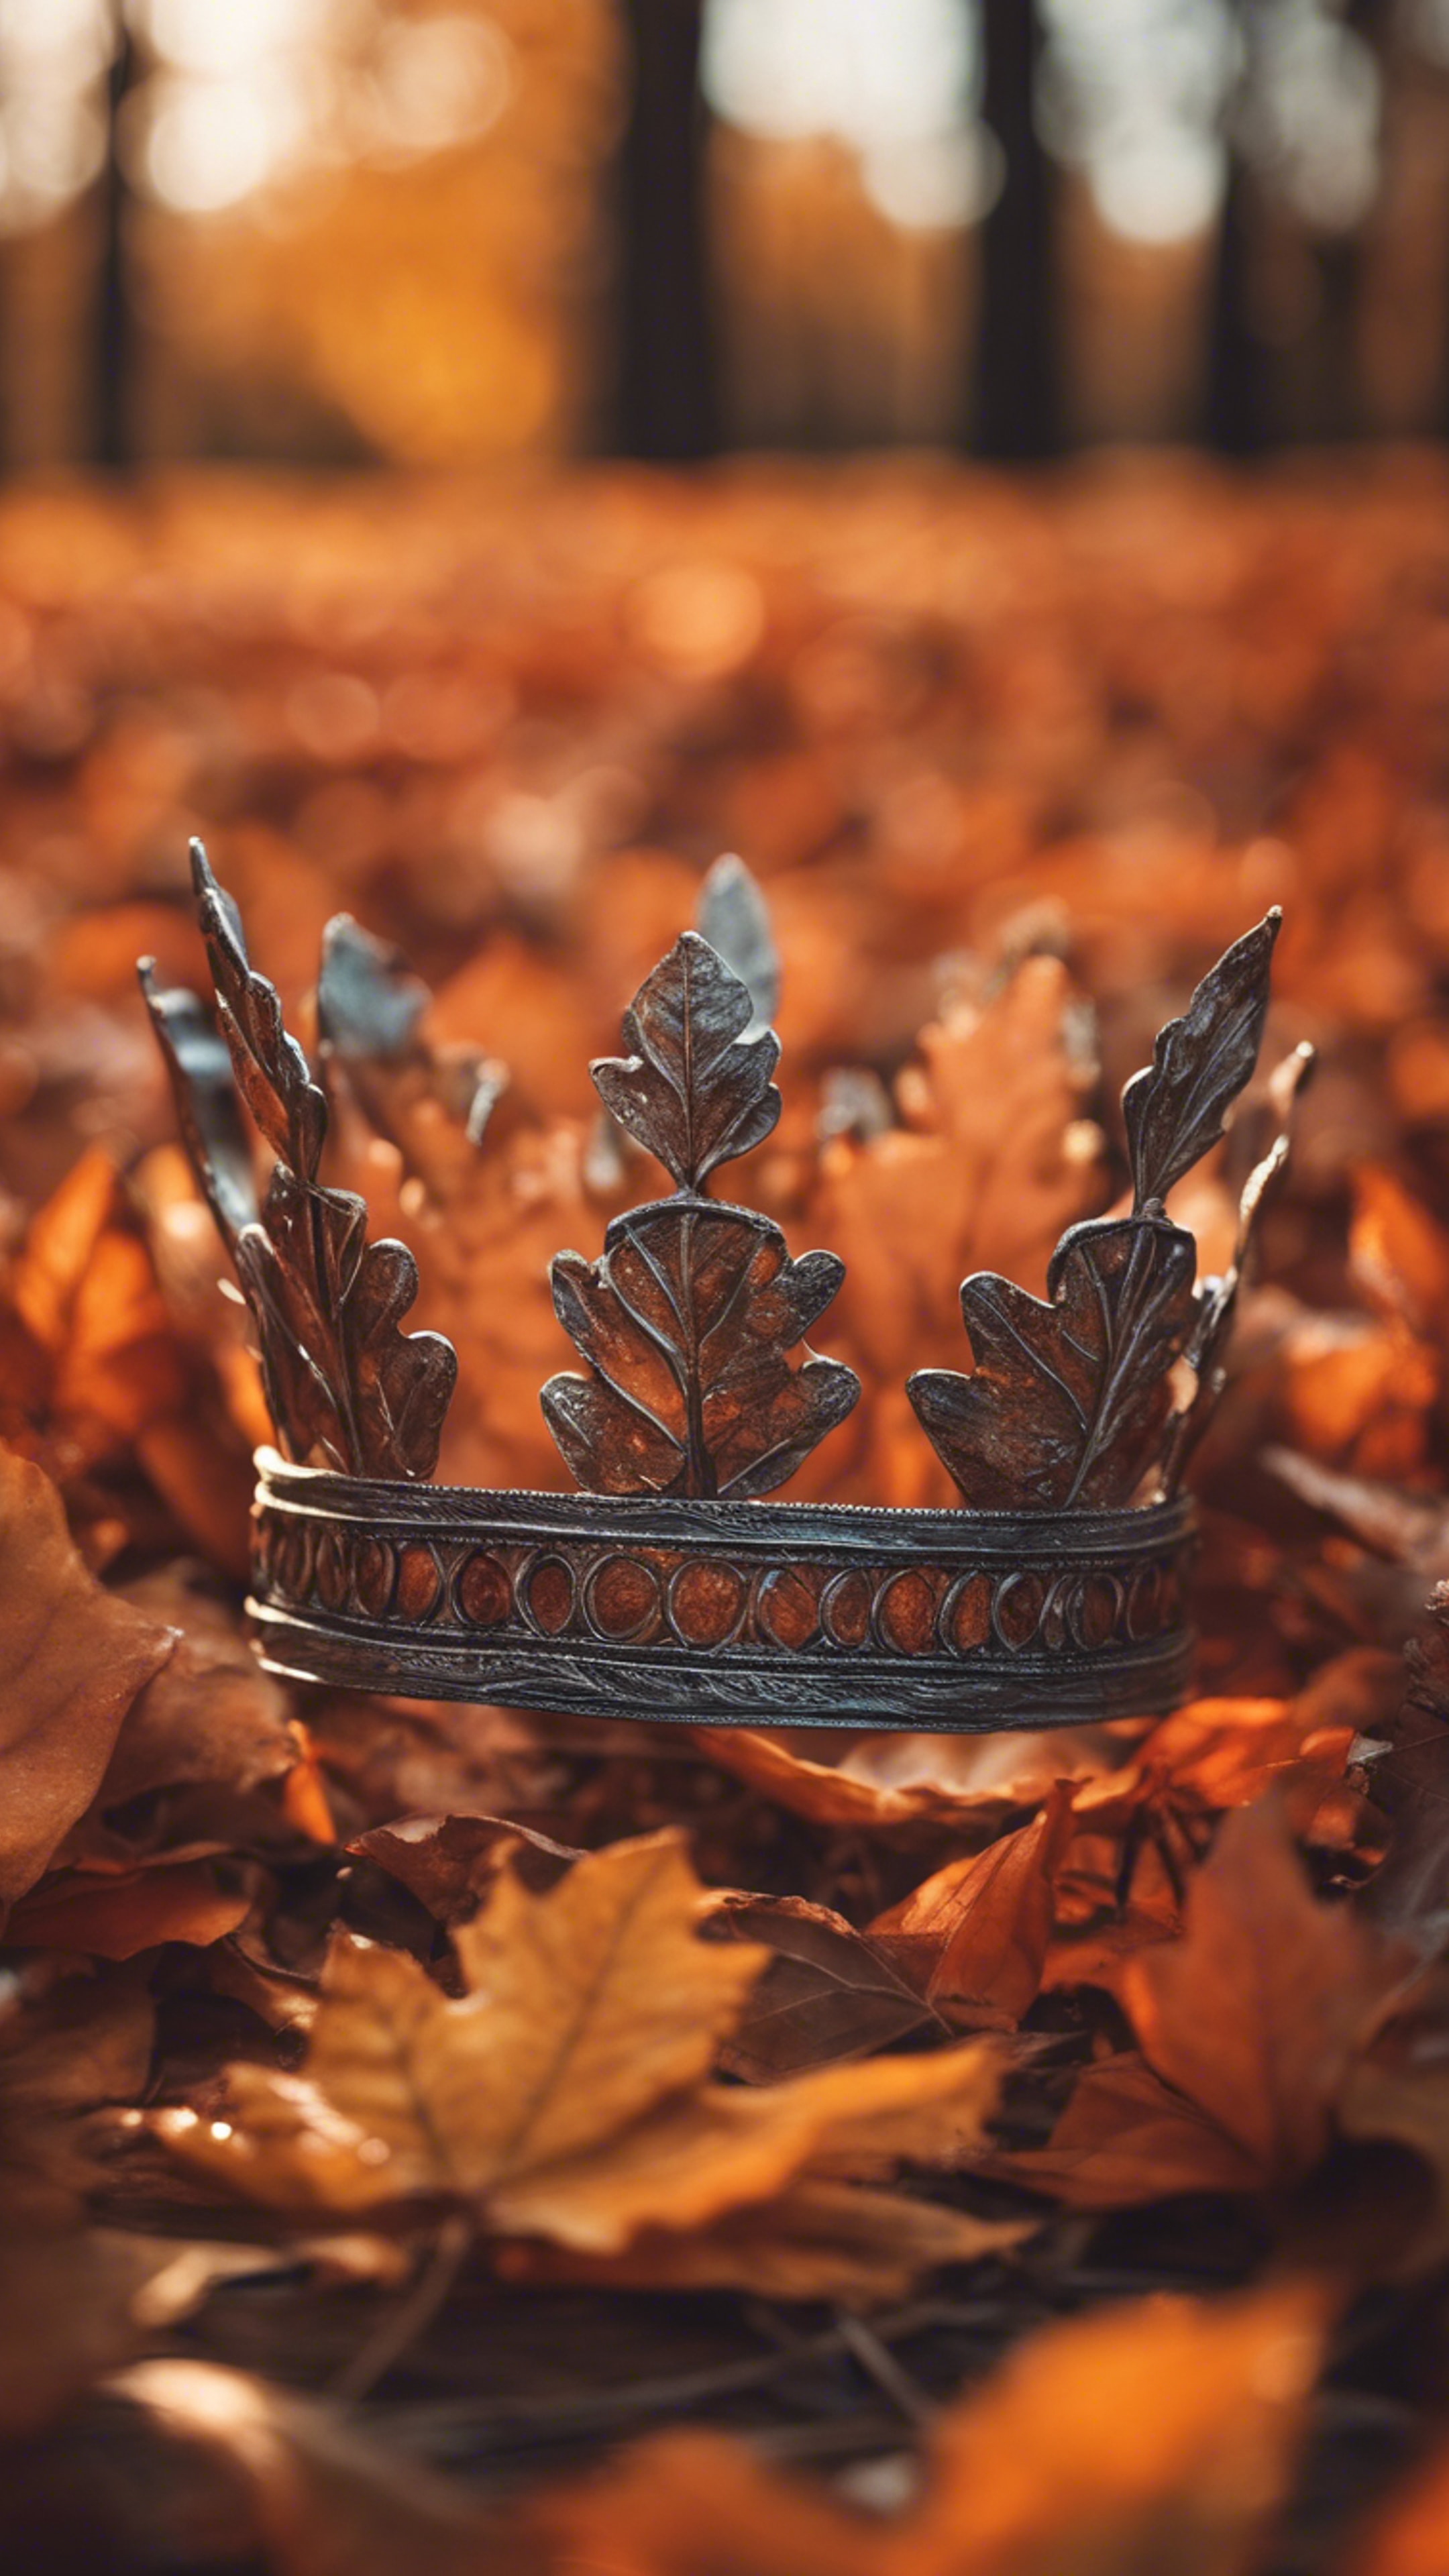 A crown made of fiery orange autumn leaves, a symbol of the season's abundance and the end of a bountiful harvest.壁紙[cfaded4ac96c4e3ba15a]